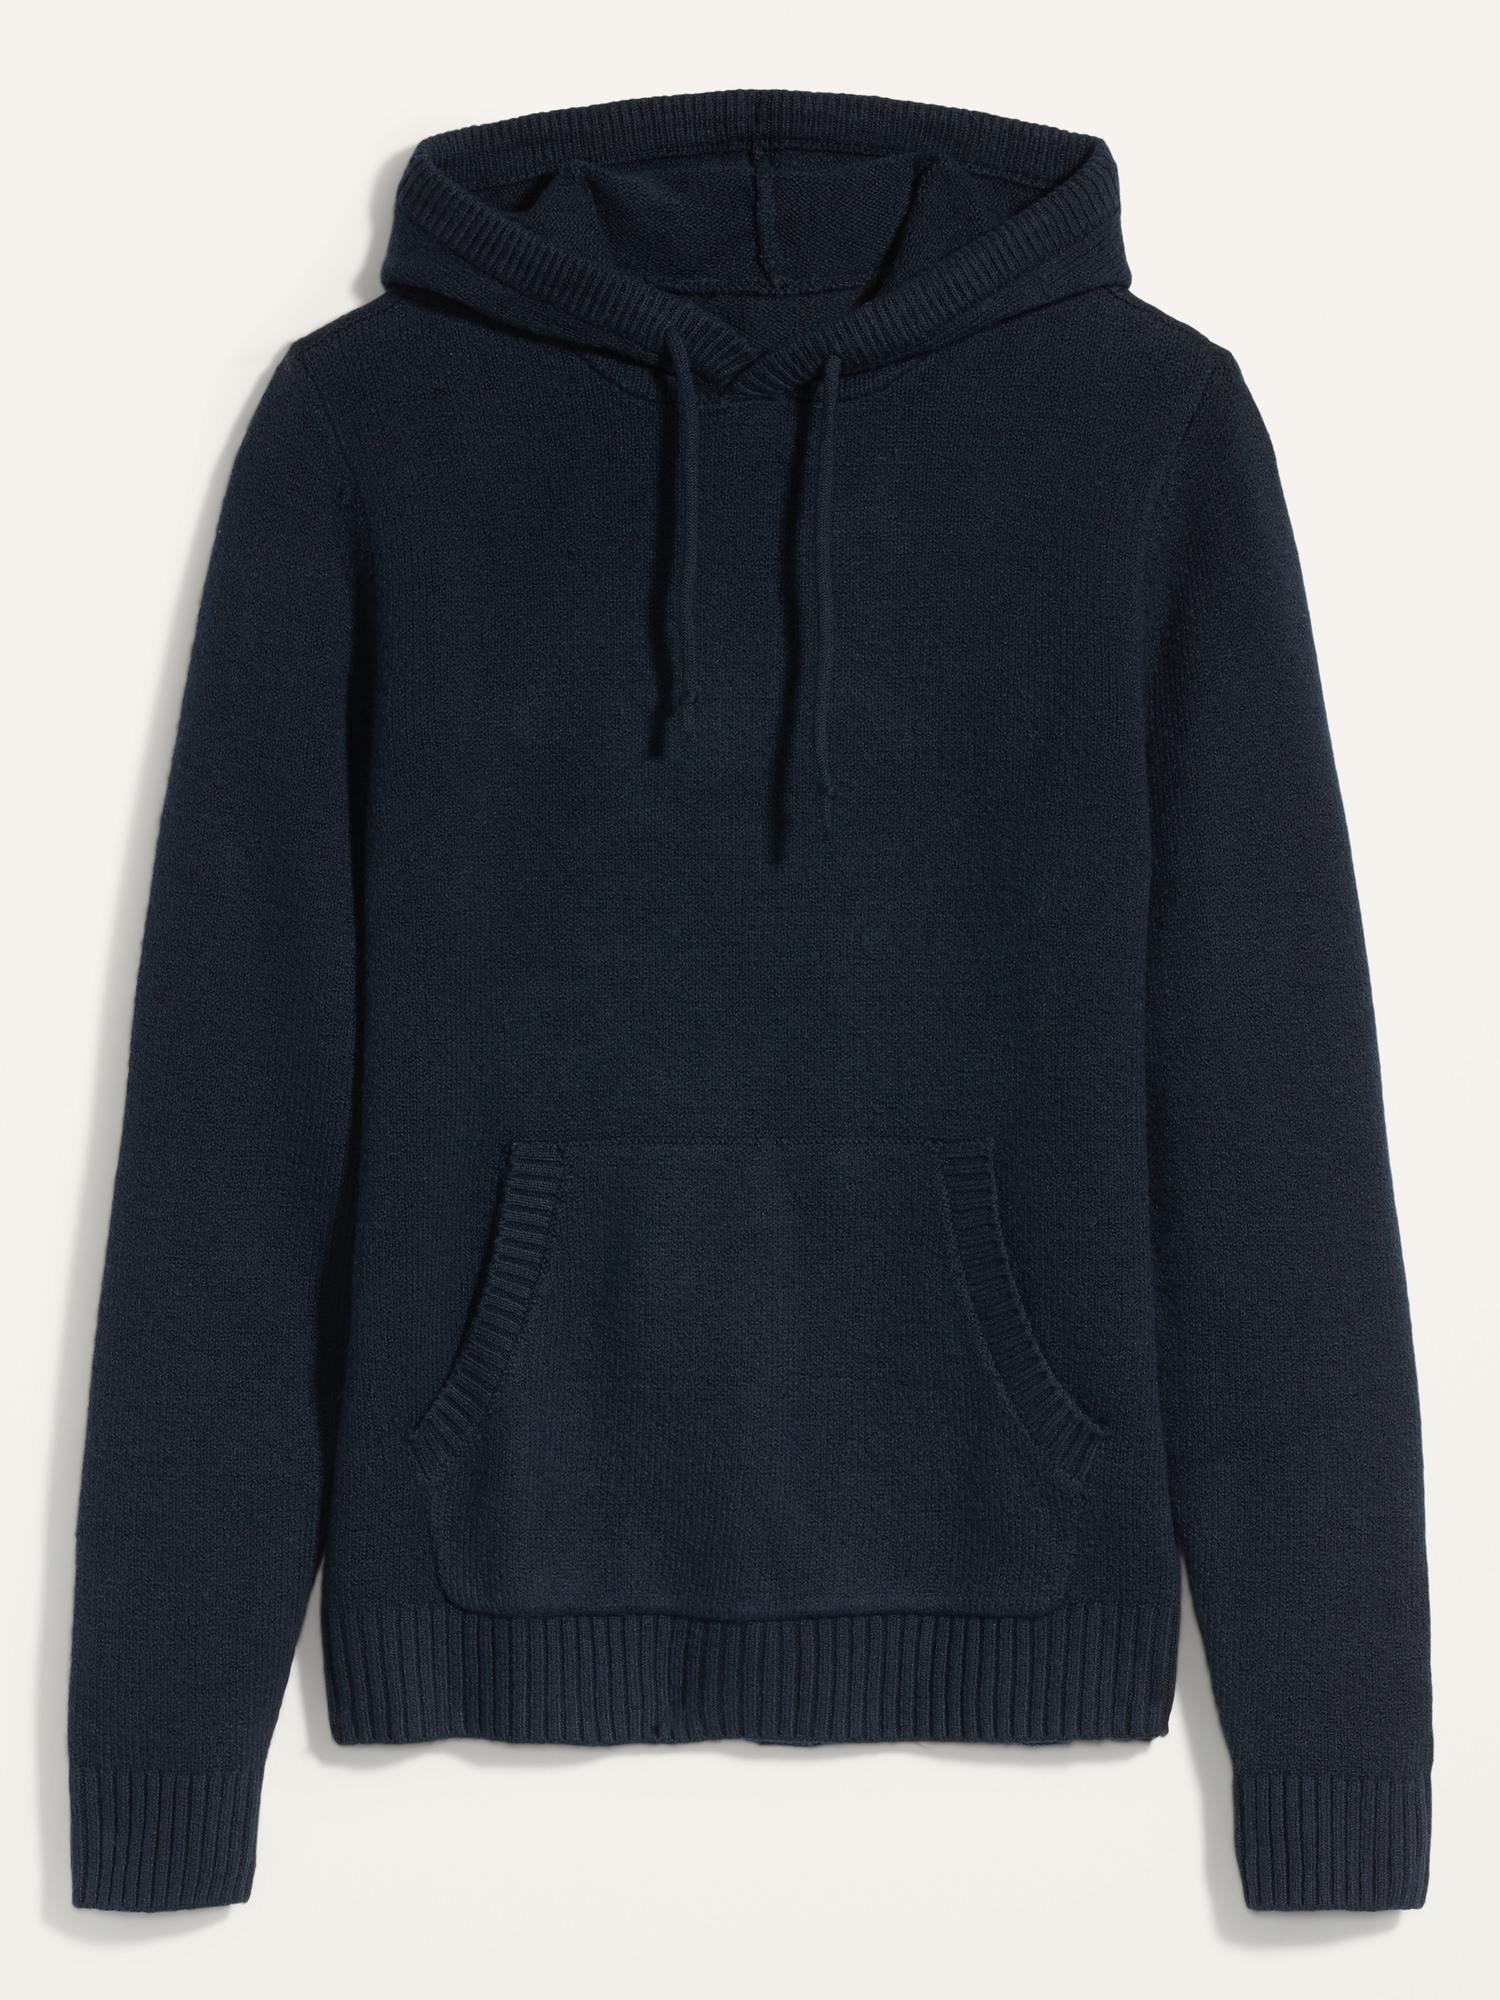 Cozy Sweater Pullover Hoodie for Men